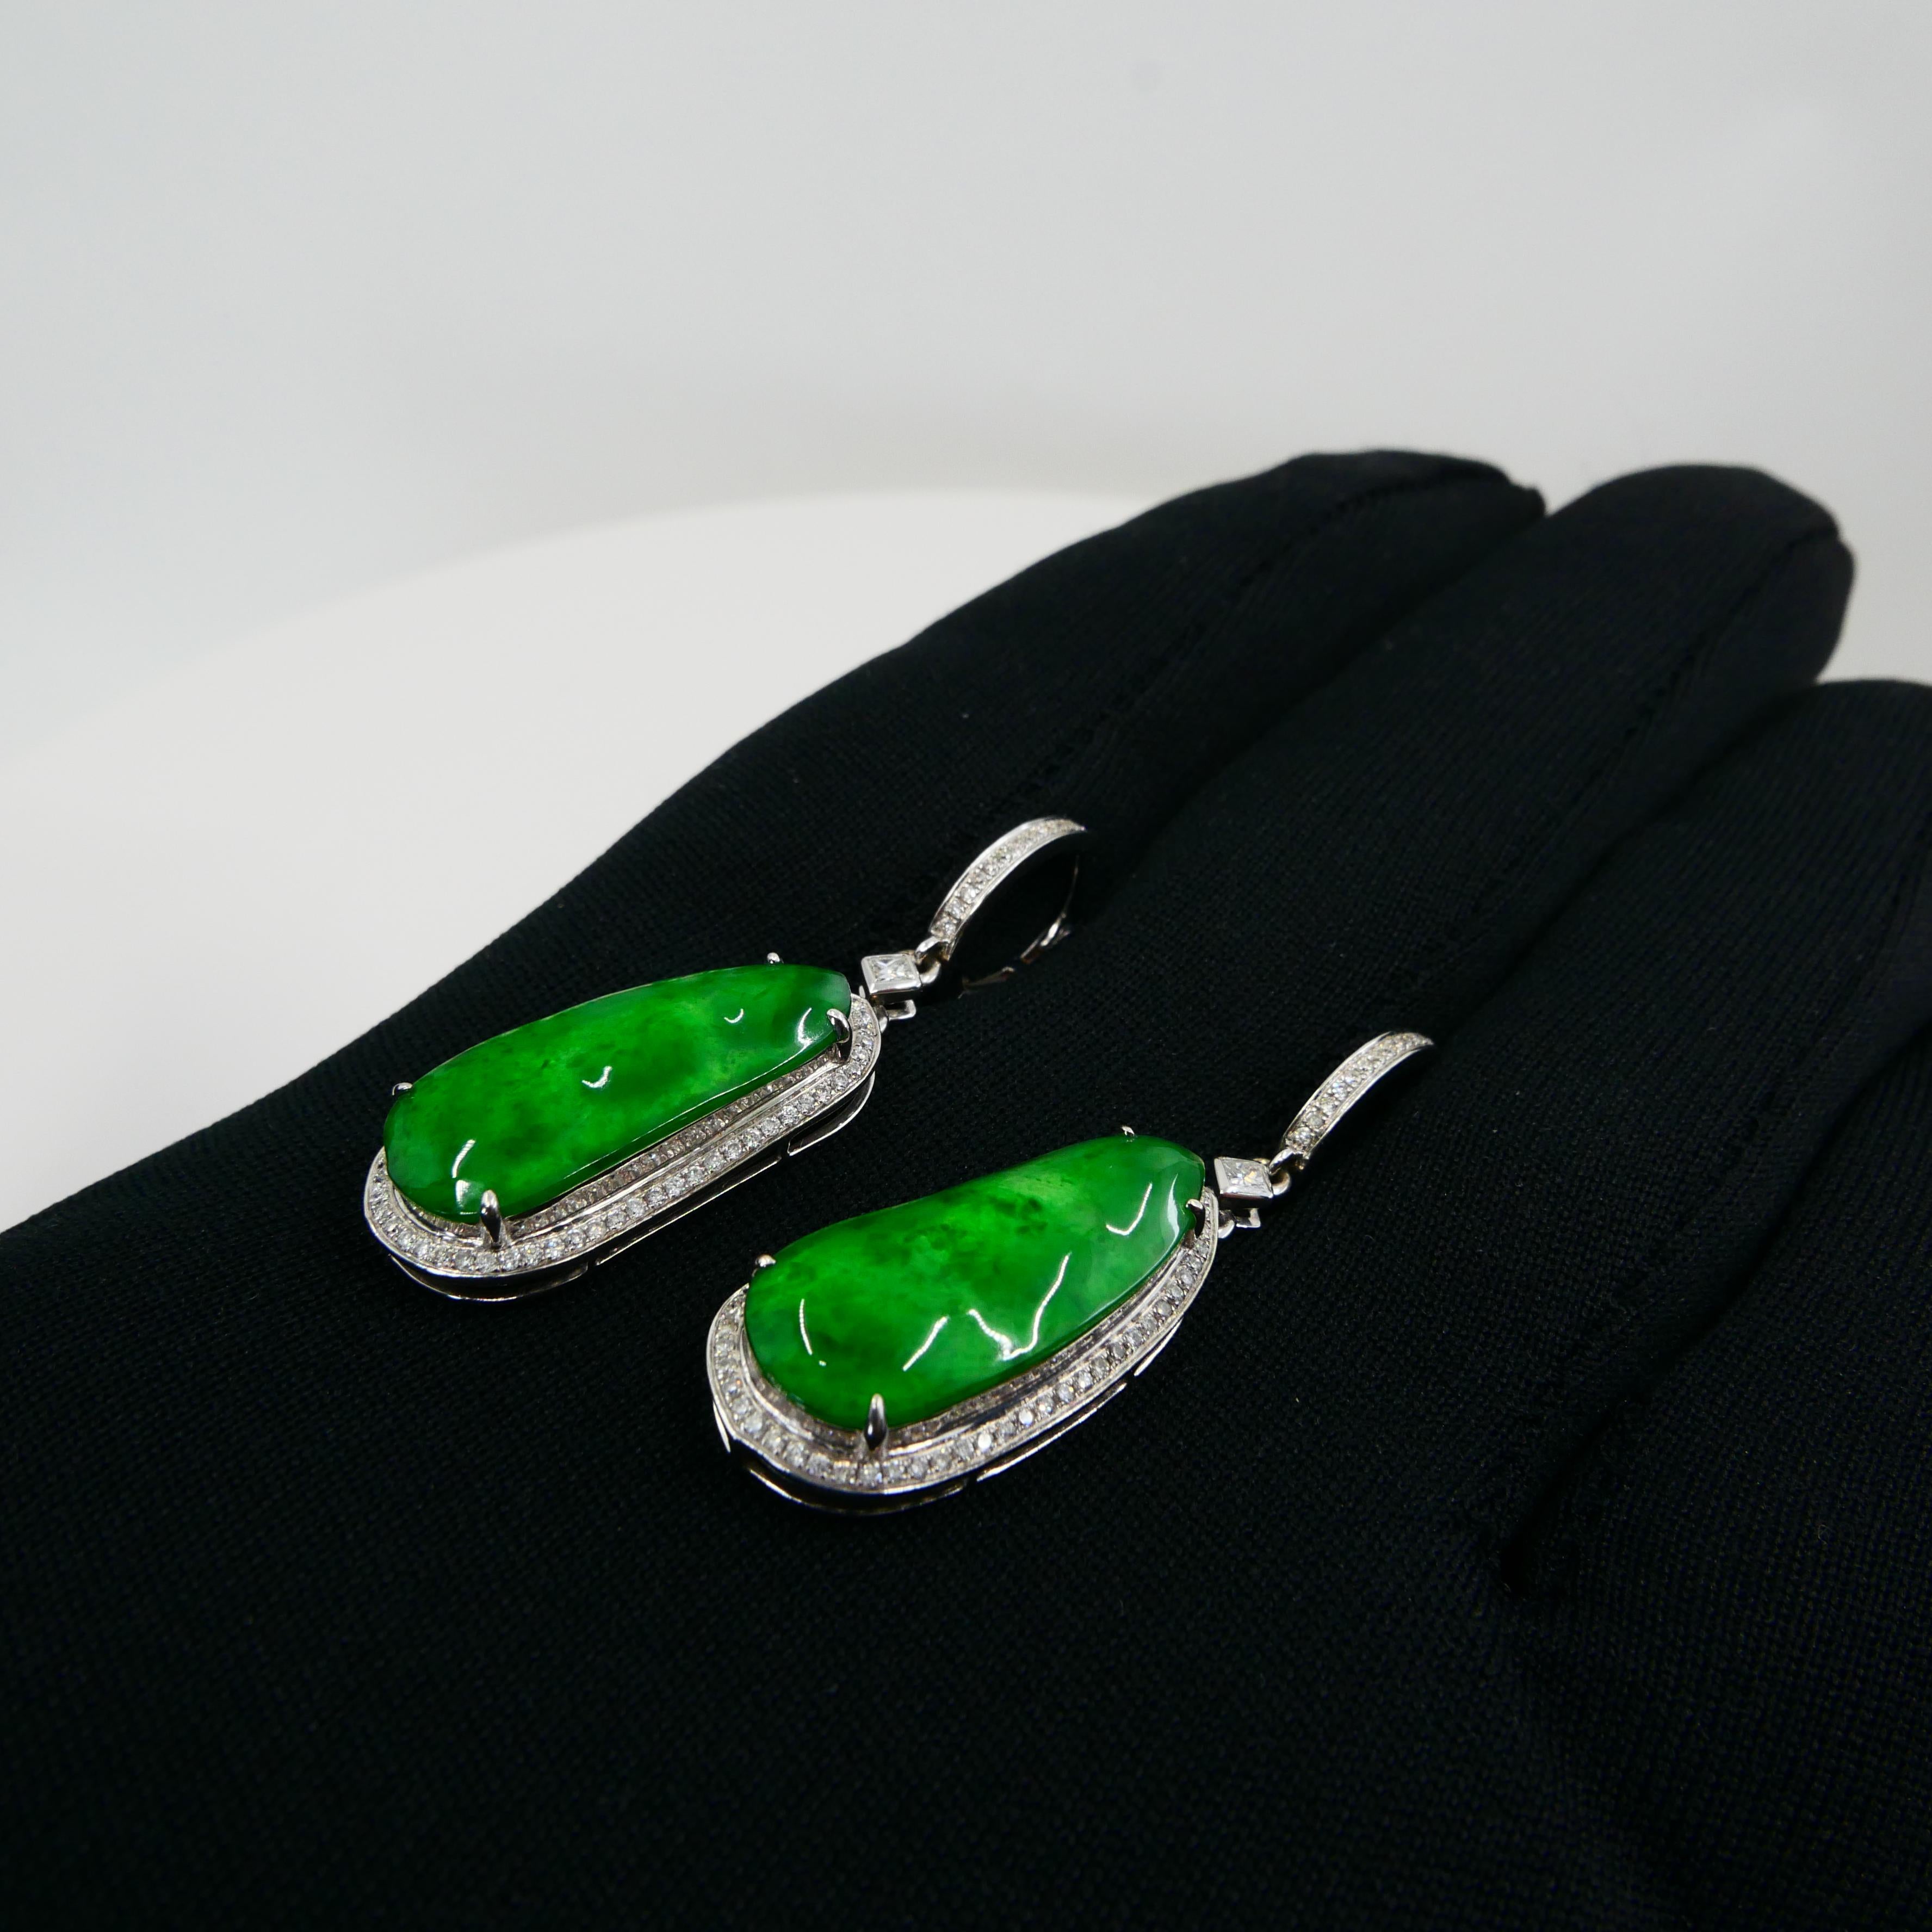 Certified Natural Type A Icy Jade Peapod Diamond Earrings, Glowing Apple Green In New Condition For Sale In Hong Kong, HK